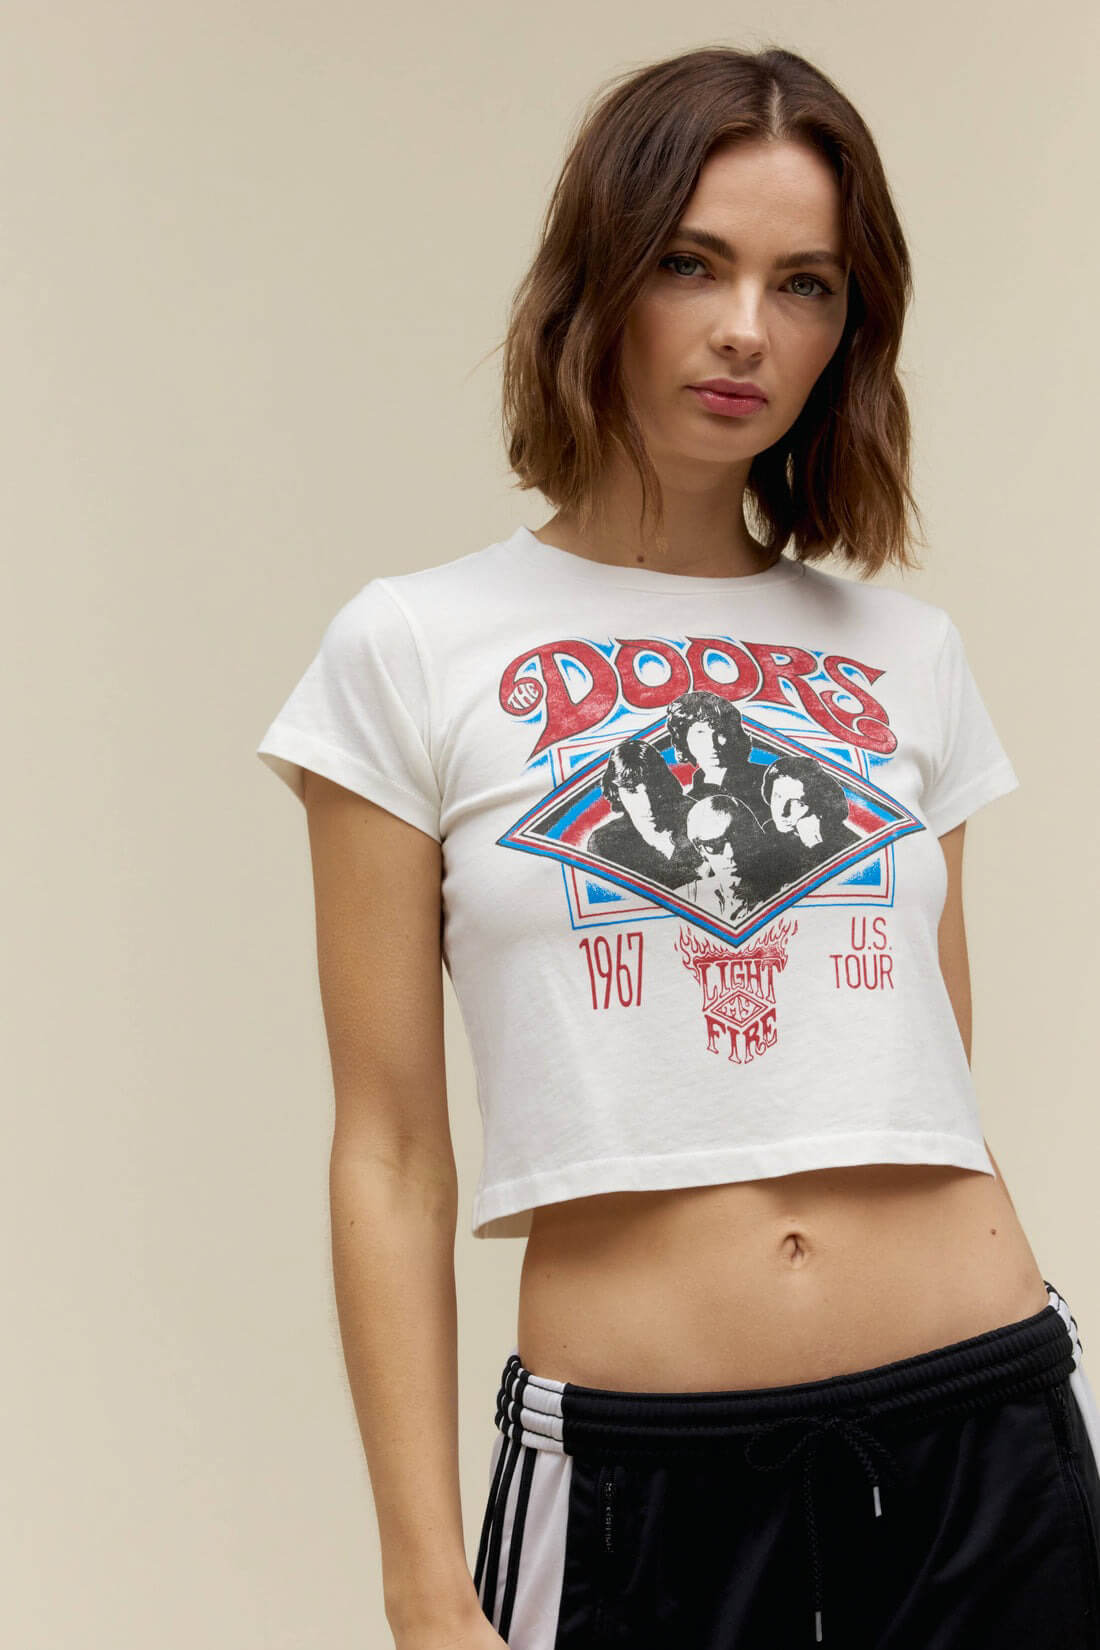 Daydreamer Tees the doors light my fire camp tee in vintage white